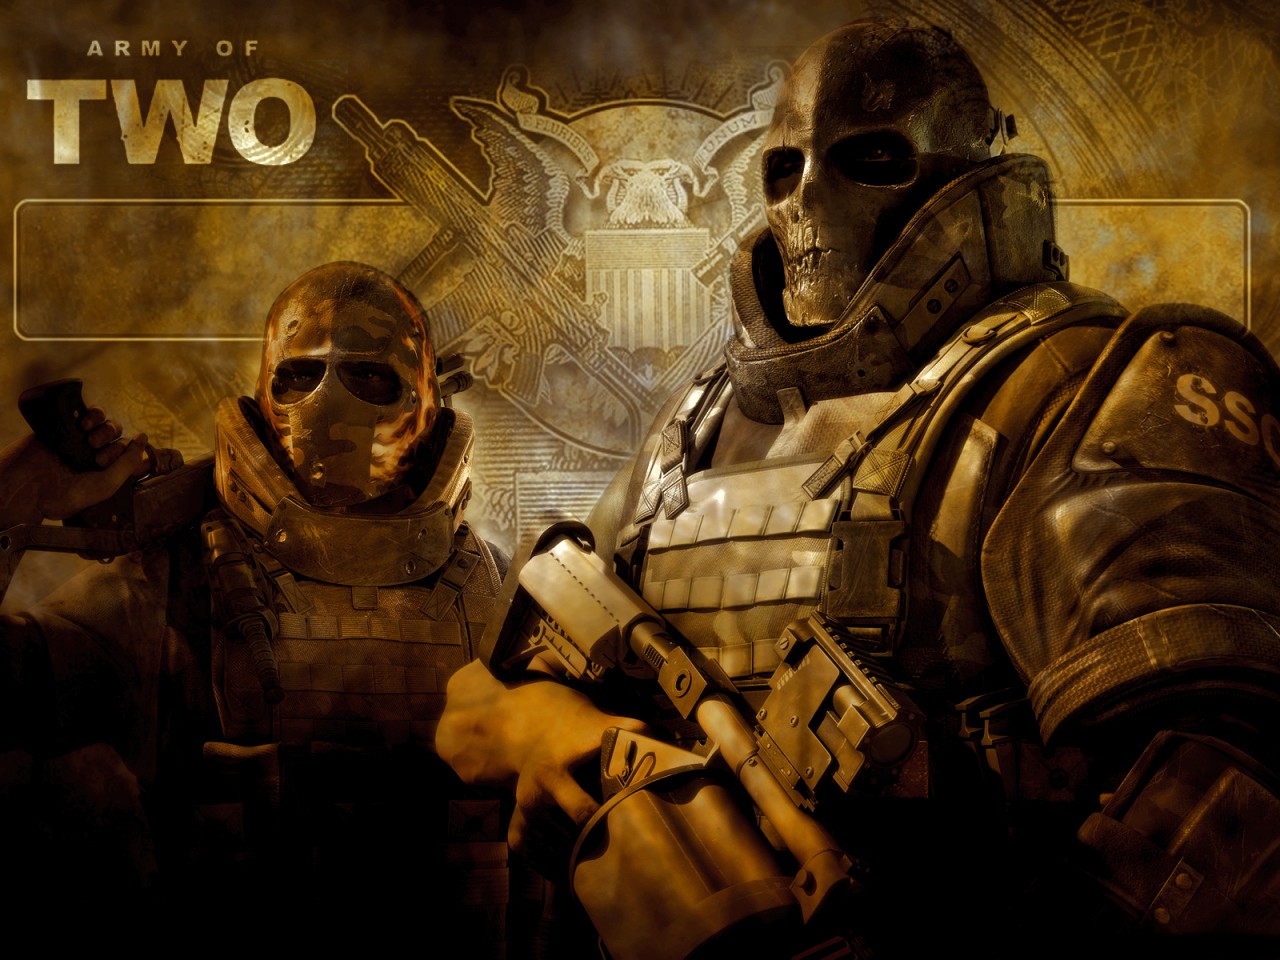 Army of Two by dxcombine